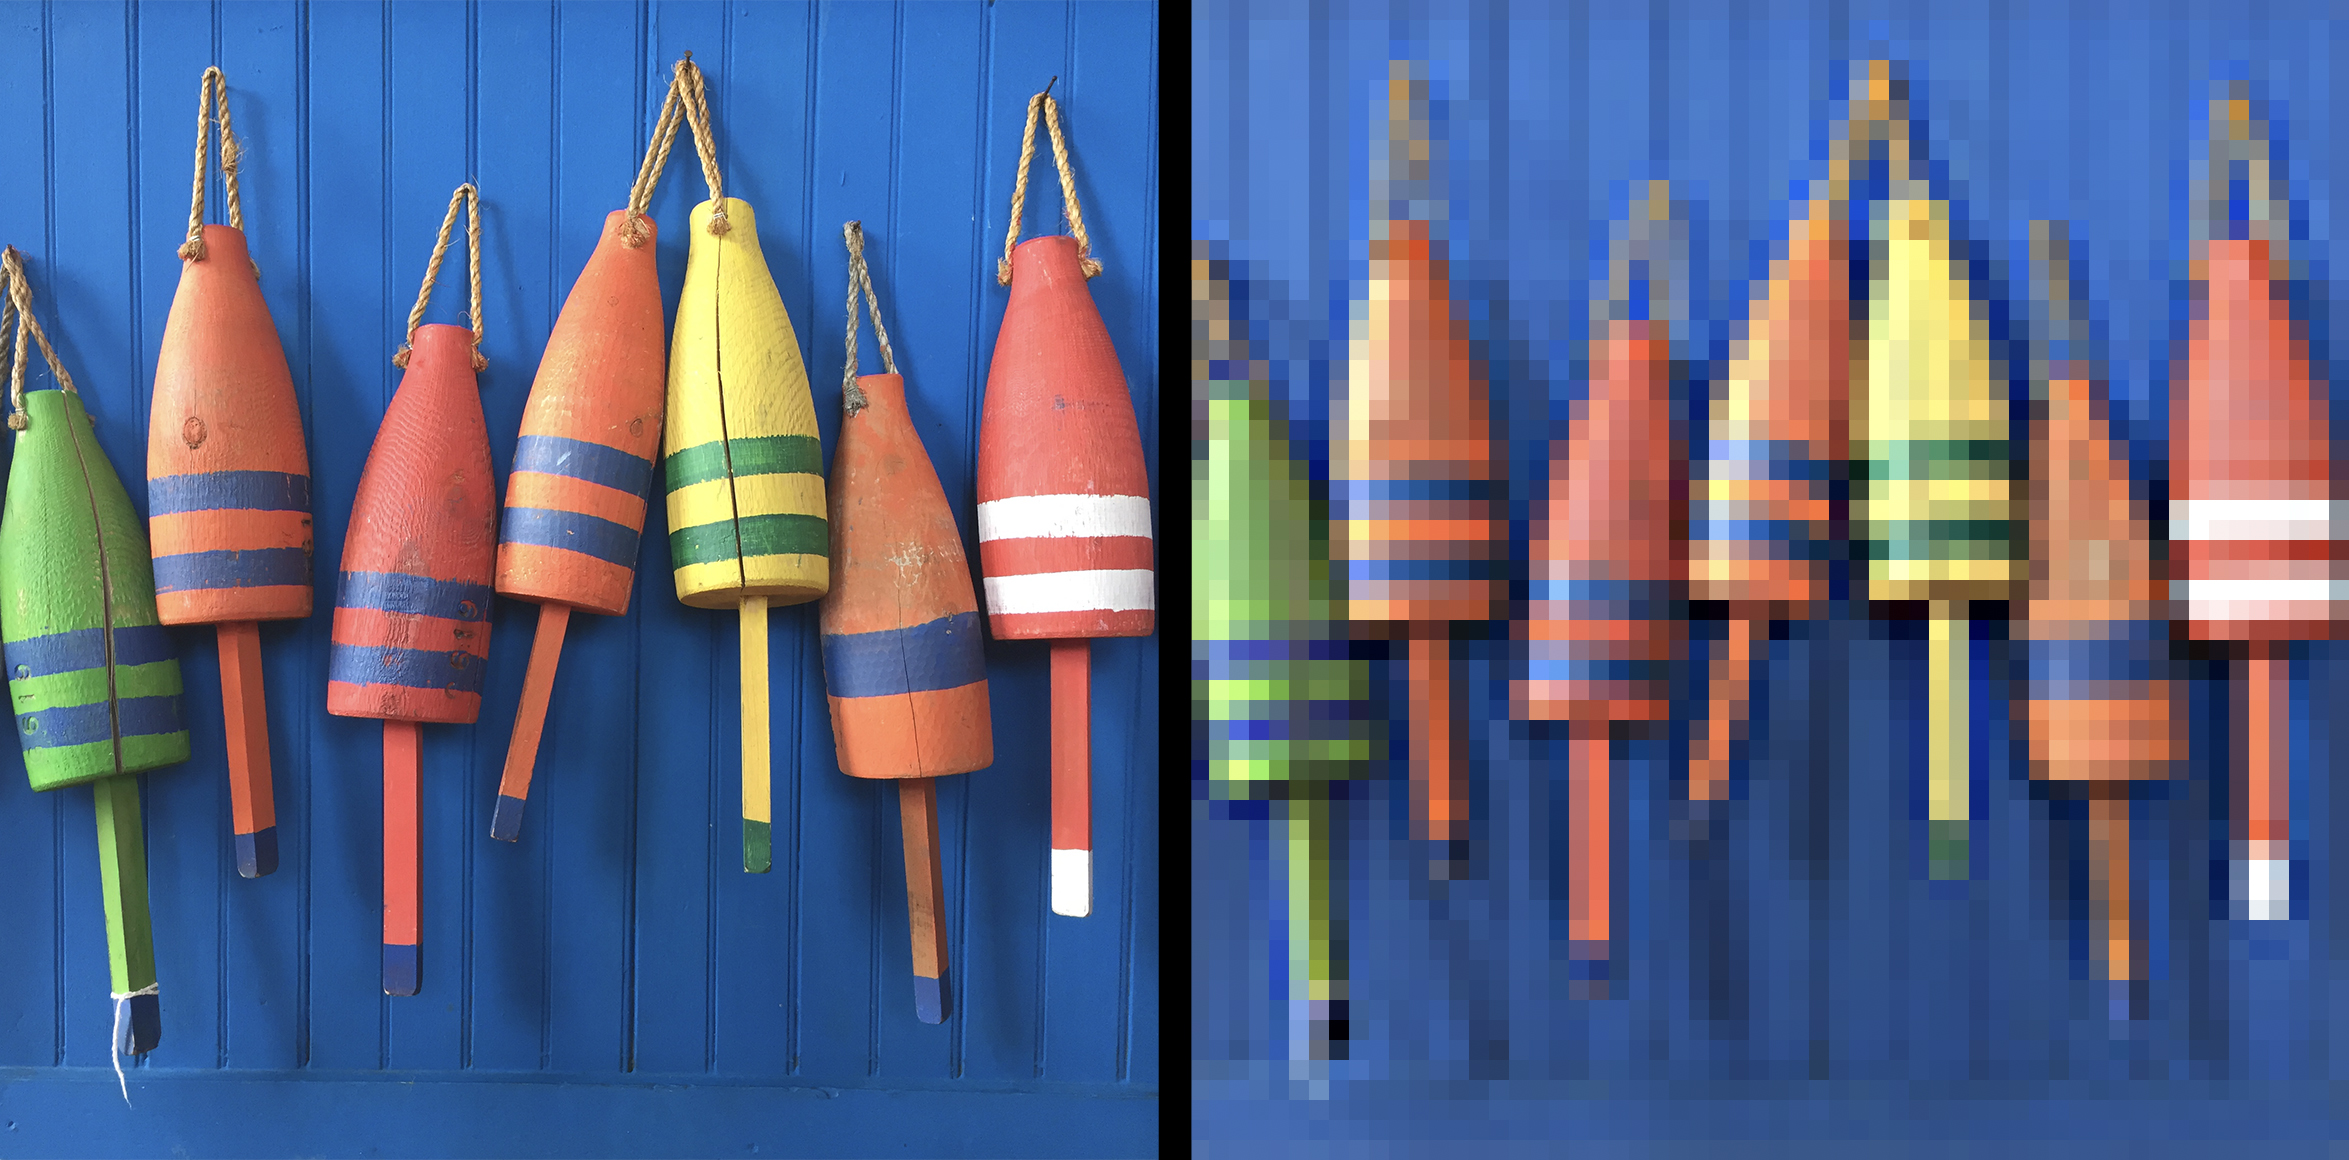 hi res and low res images side by side of buoys hanging in a blue wall